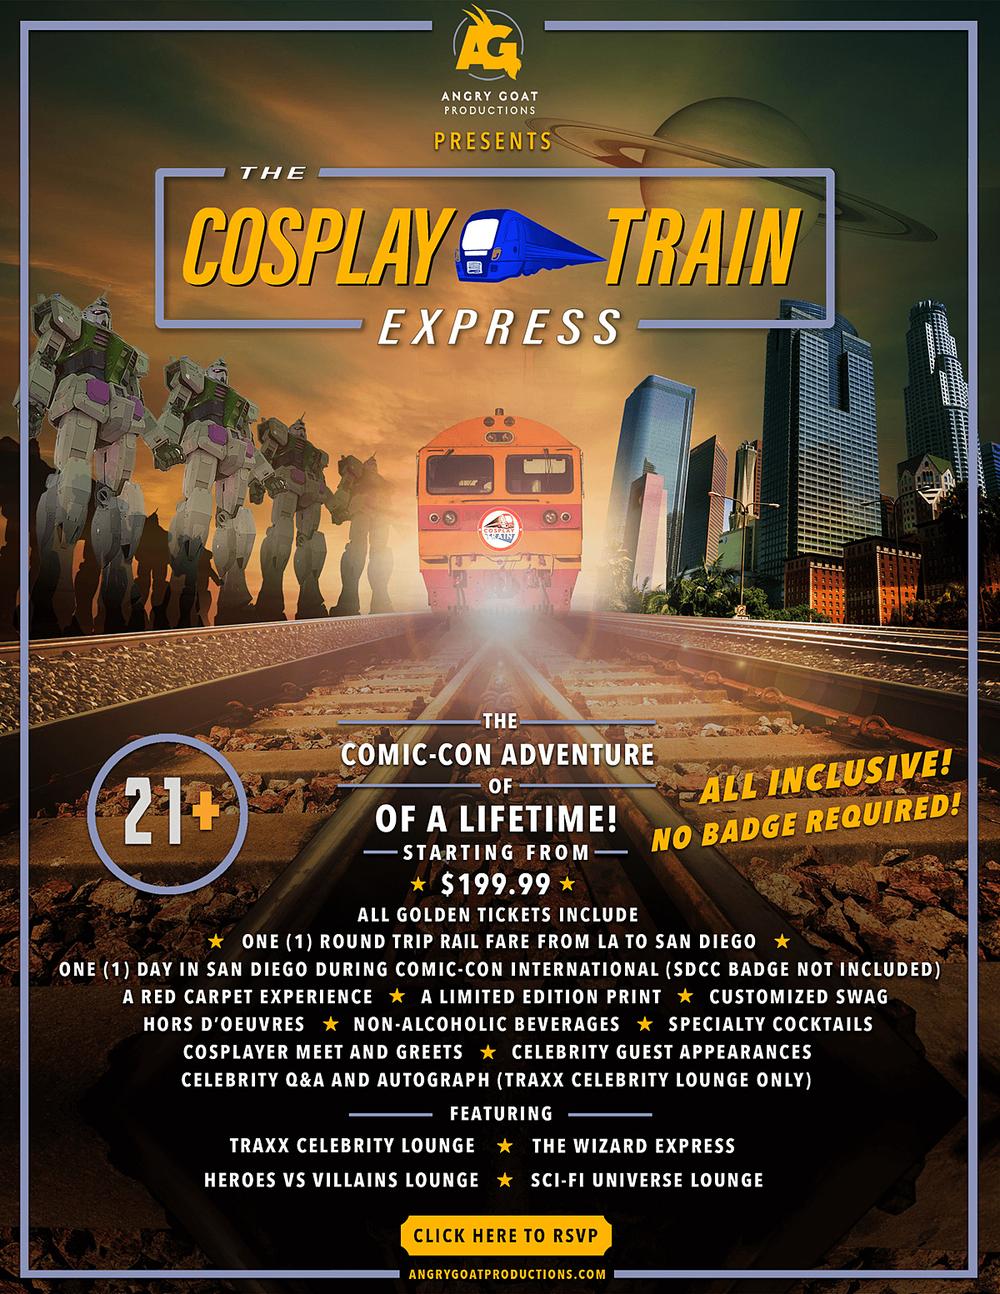 Cosplay Train Express